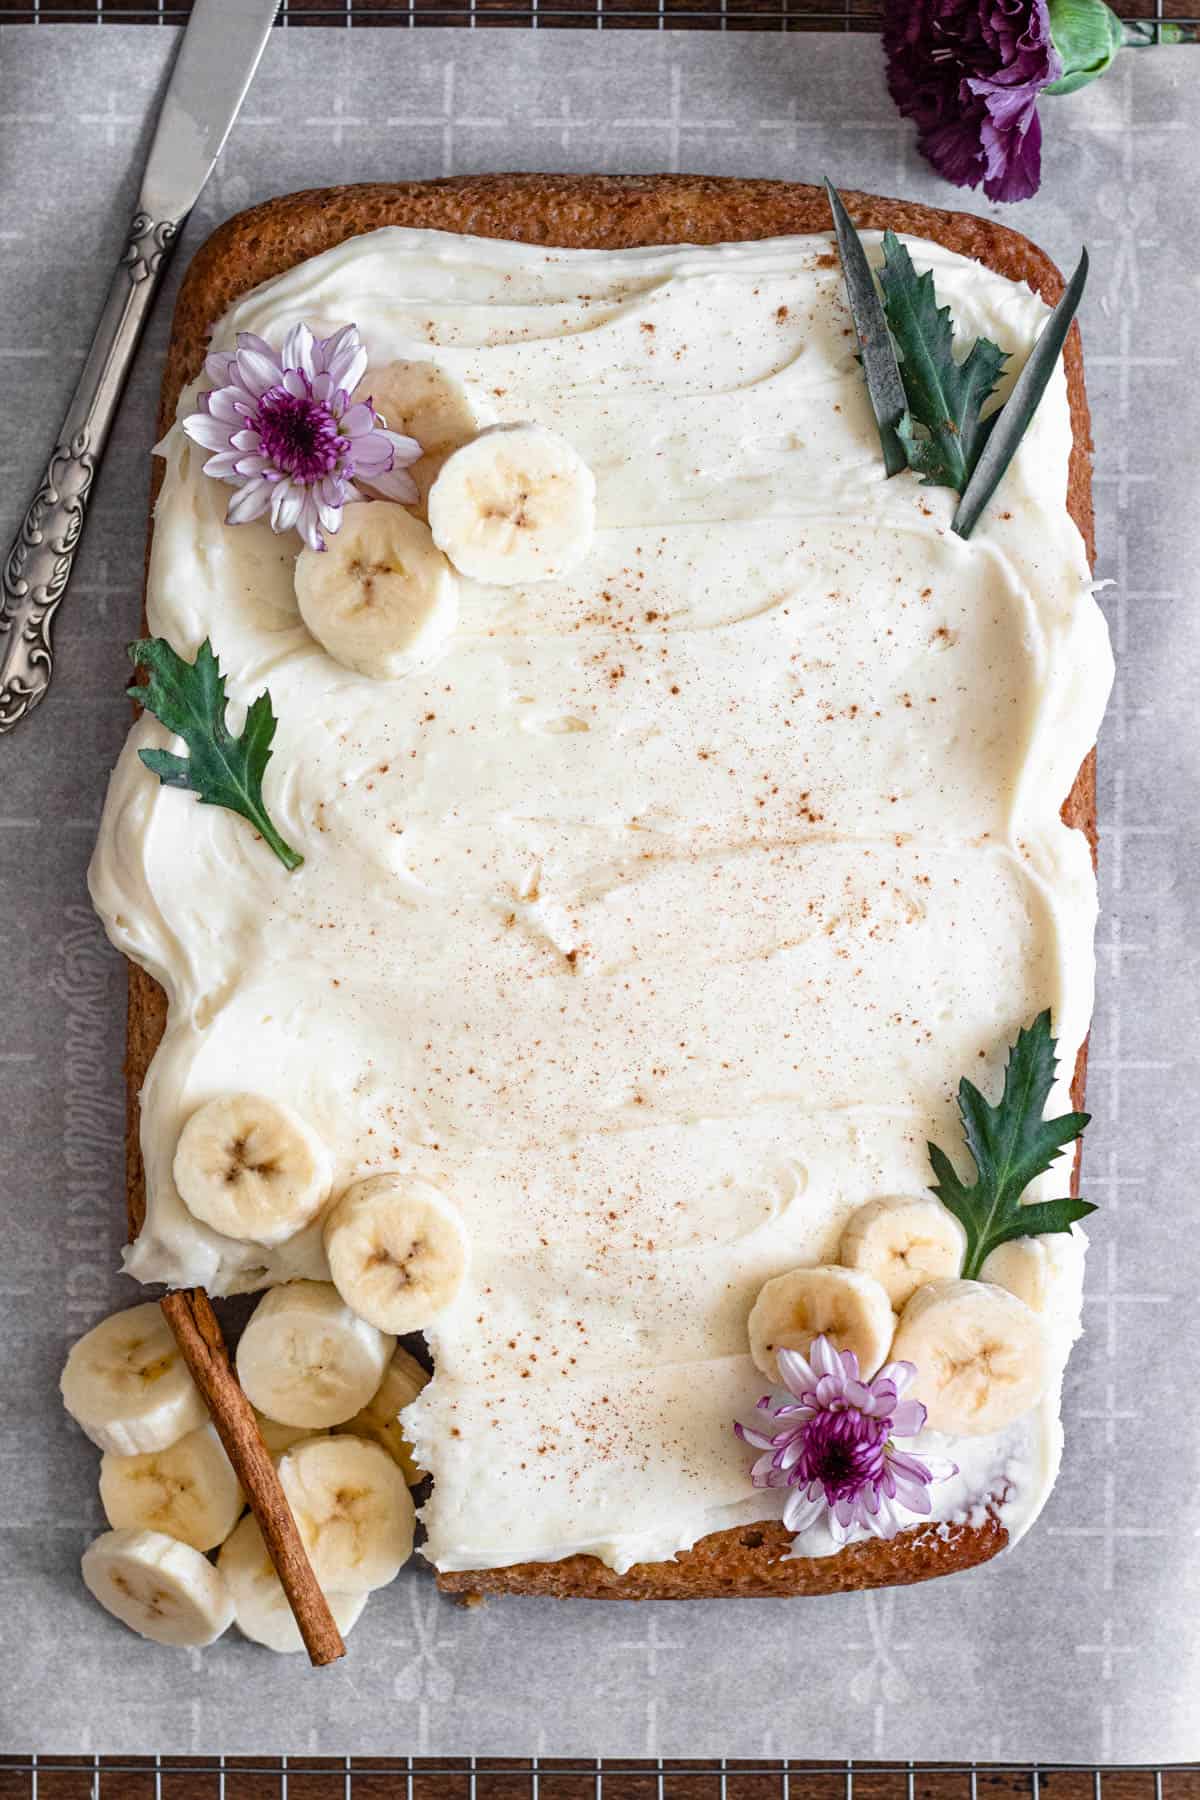 Full banana cake covered in cream cheese frosting and garnished with banana slices and small purple flowers. 